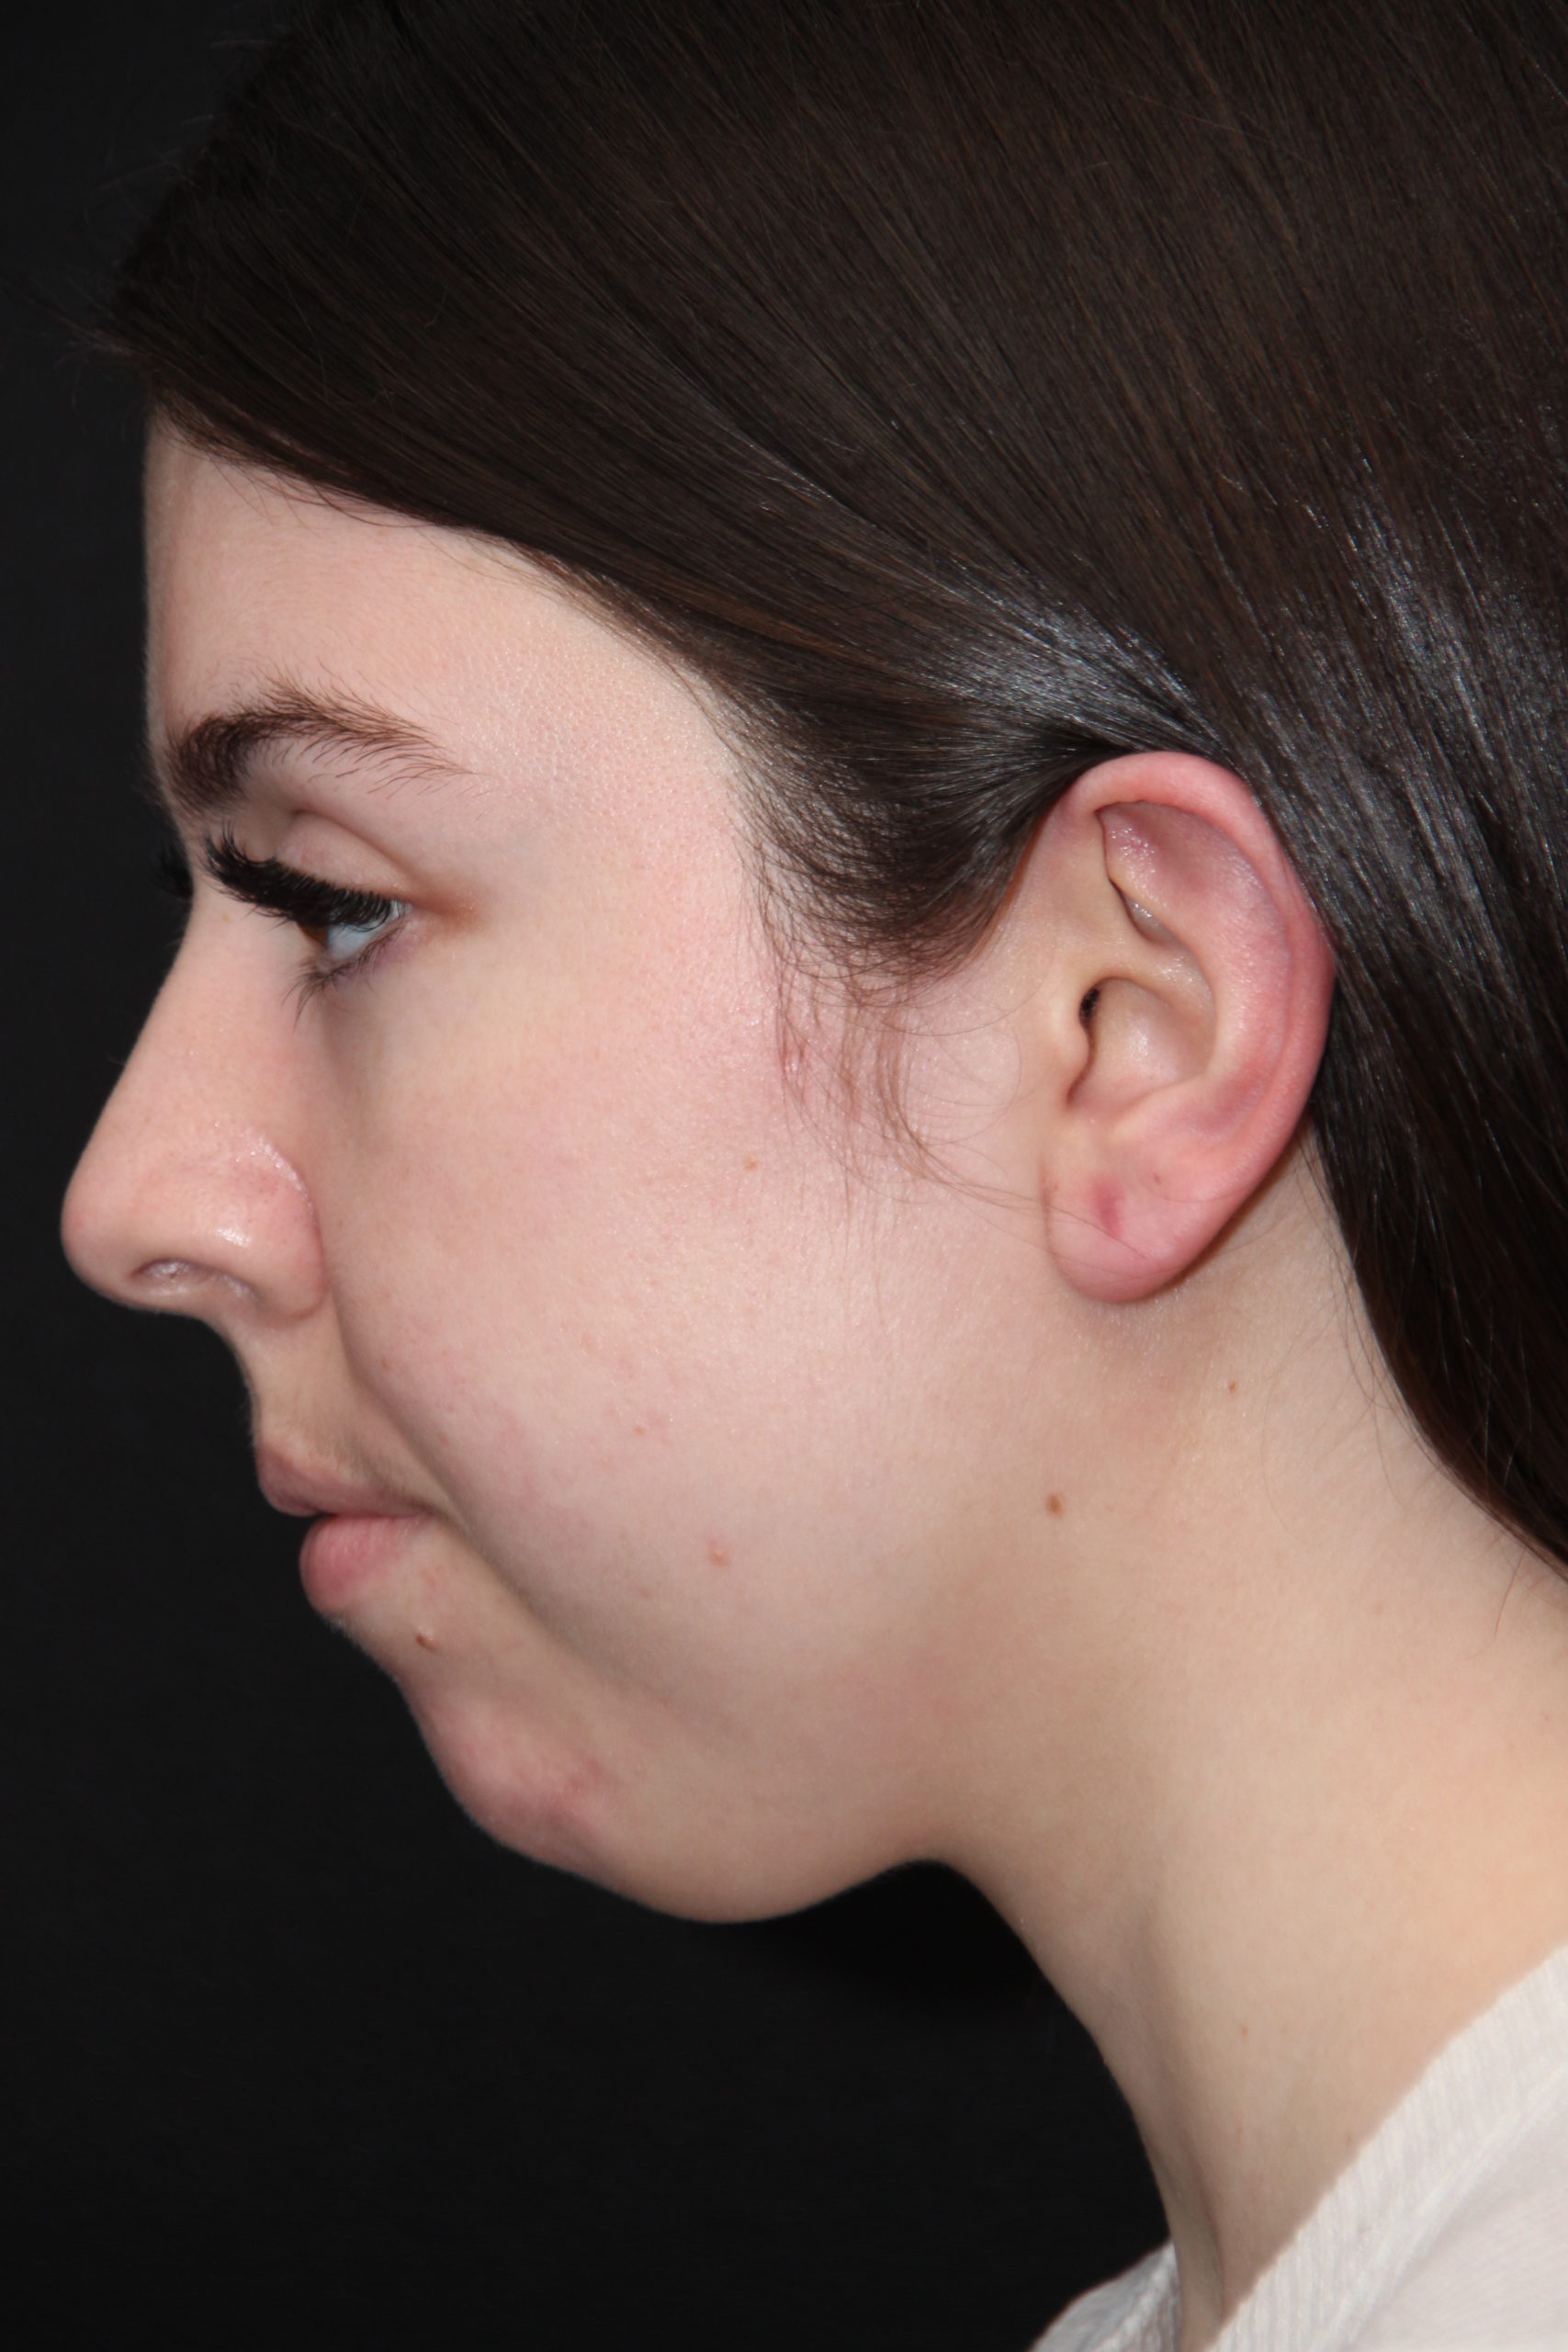 Chin Implant Surgery Before and After Photos